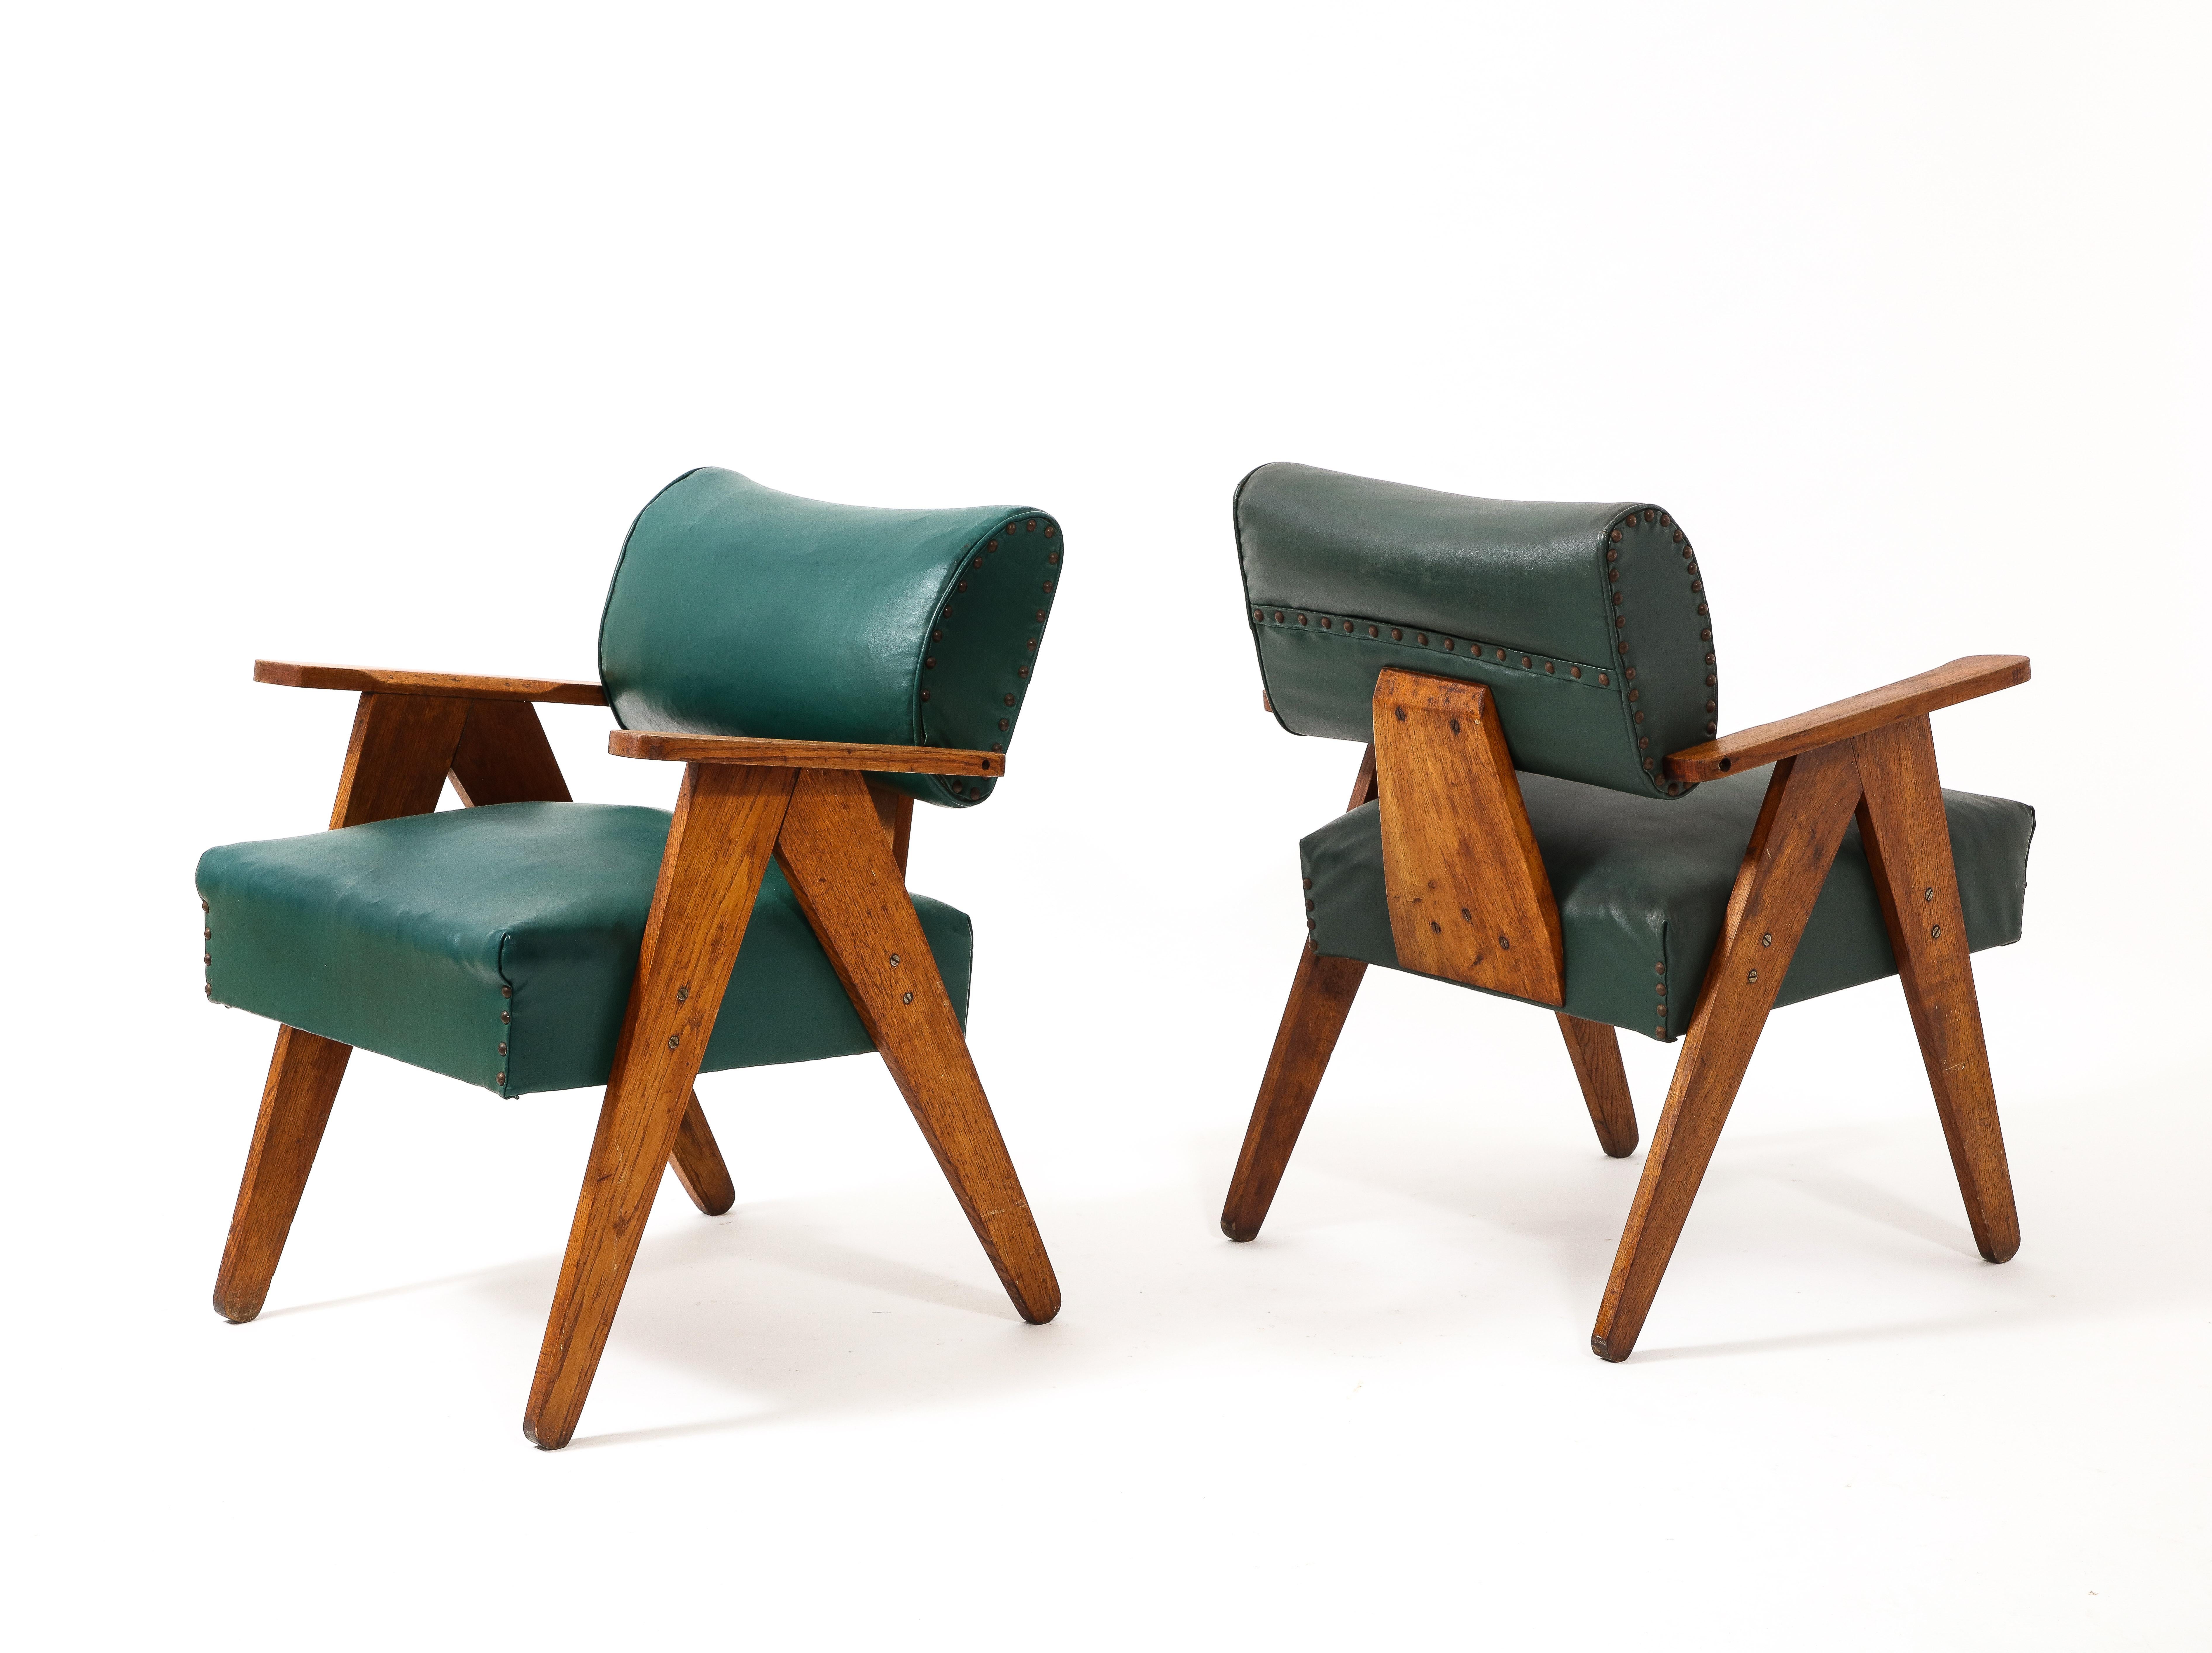 Faux Leather Green Brazilian Armchairs with Stud Detailing, Brazil 1950's